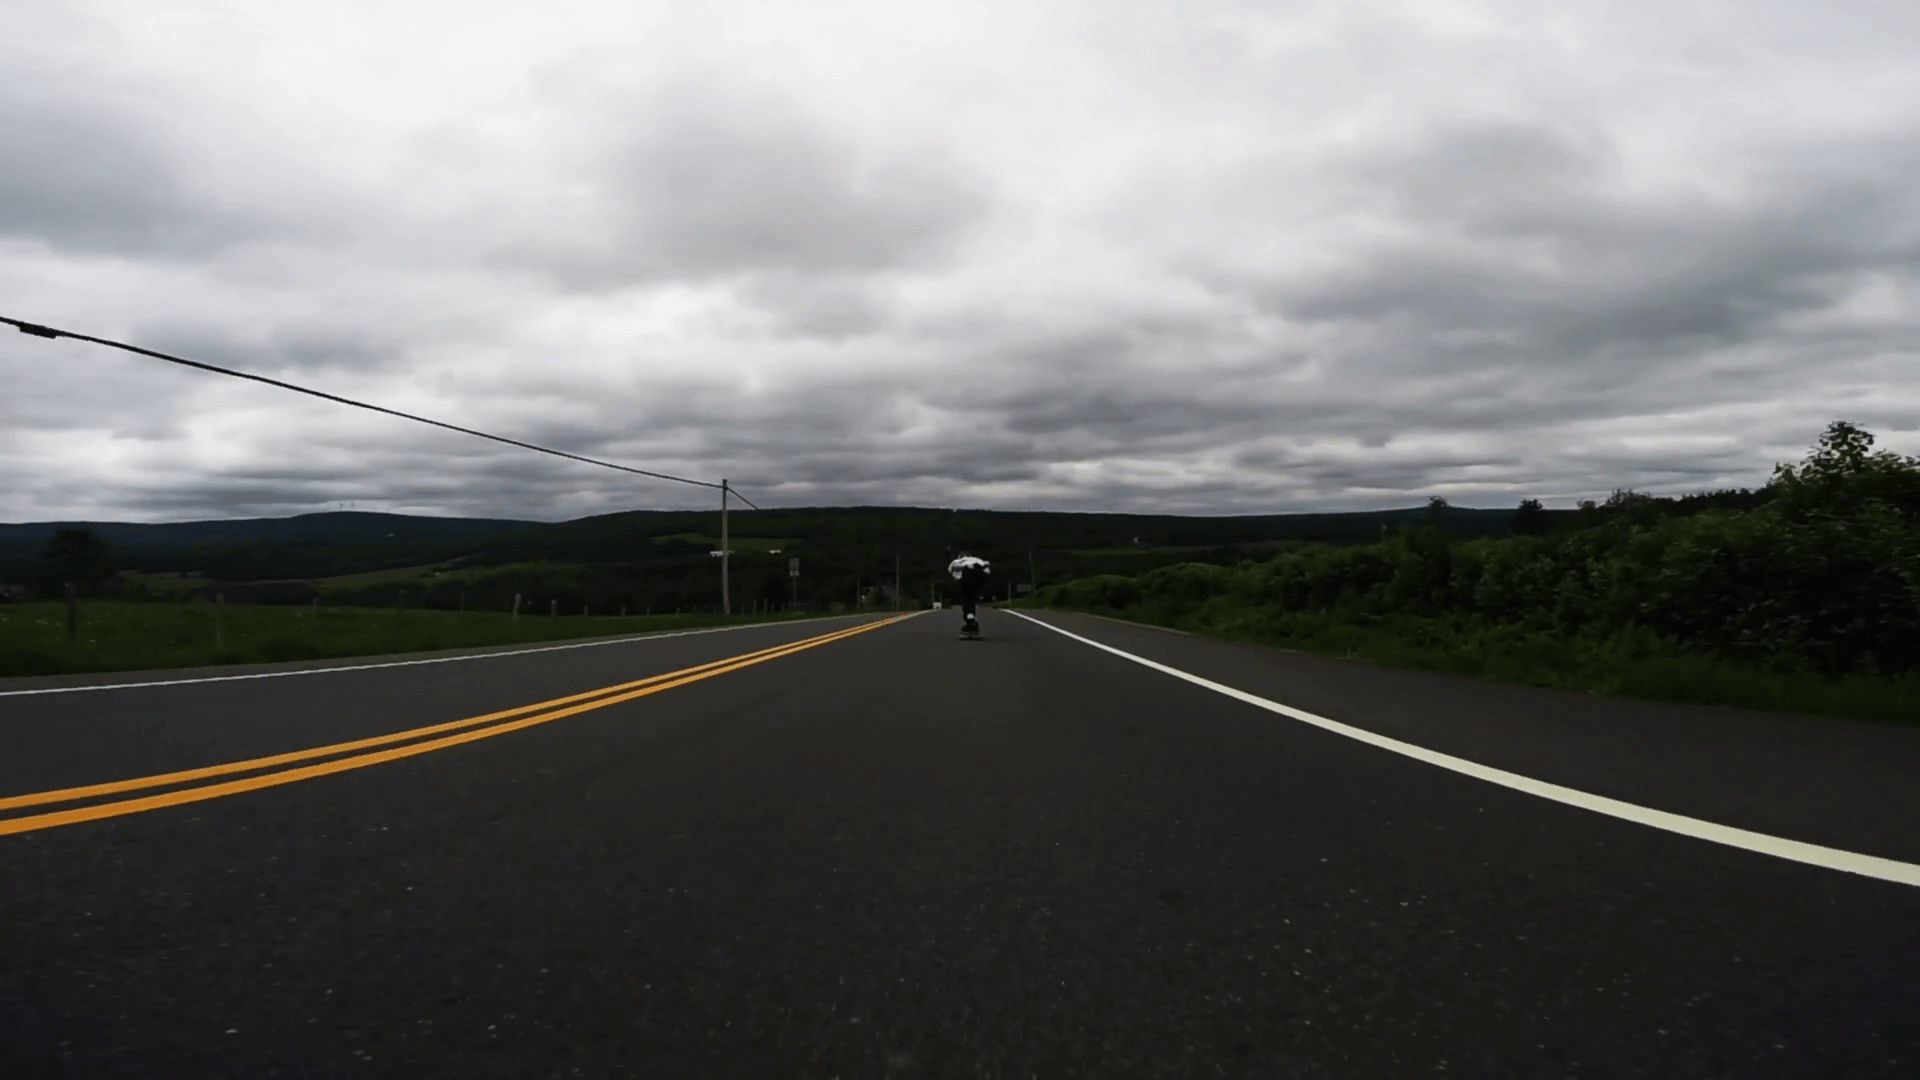 Professional skateboarder skating fast downhill the empty countryside road on longboard on cloudy day, low angle 4k shot Stock Video Footage